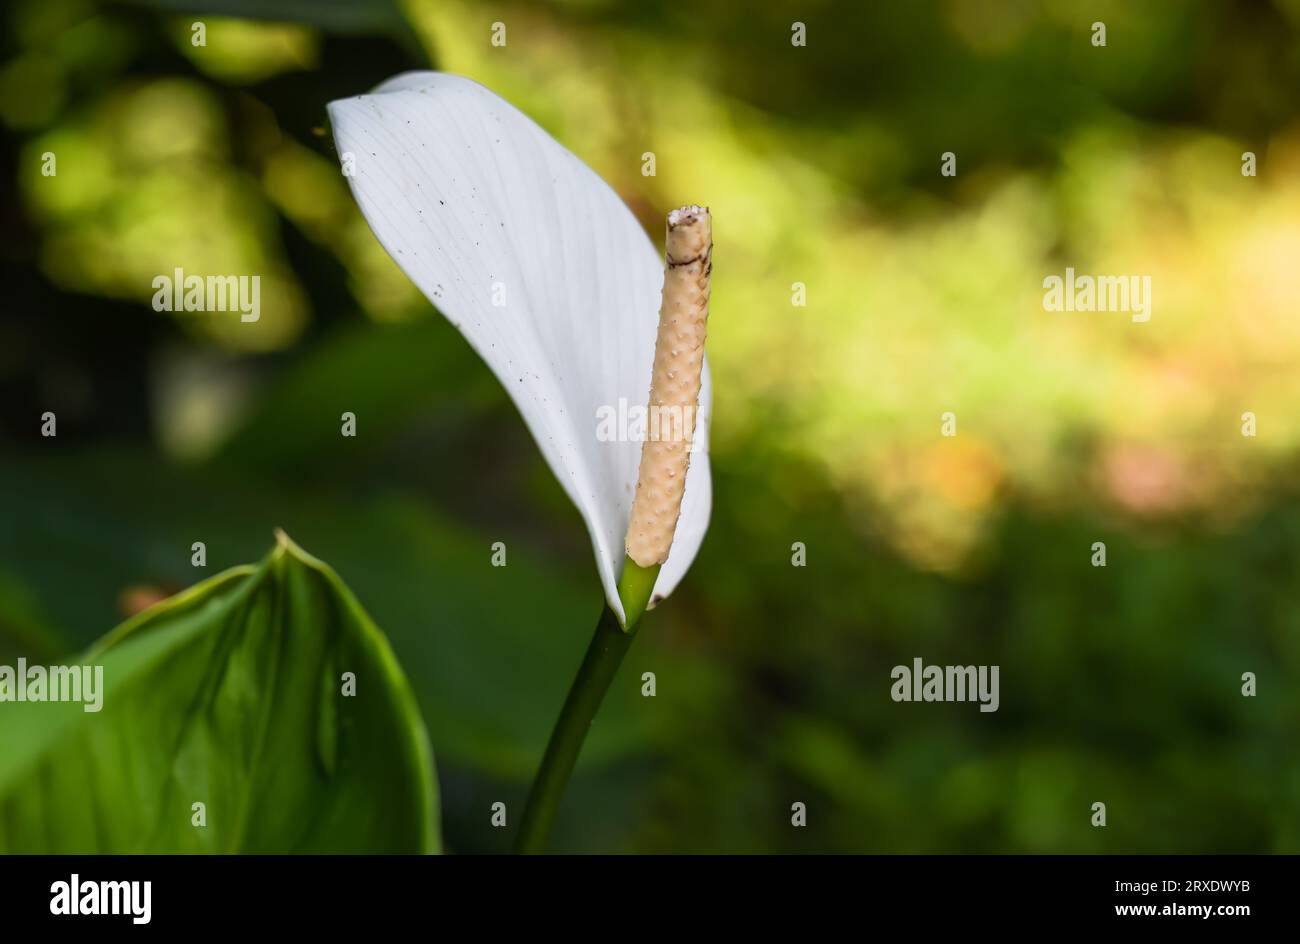 Spathiphyllum cochlearispathum commonly called peace lily growing in Vietnam Stock Photo